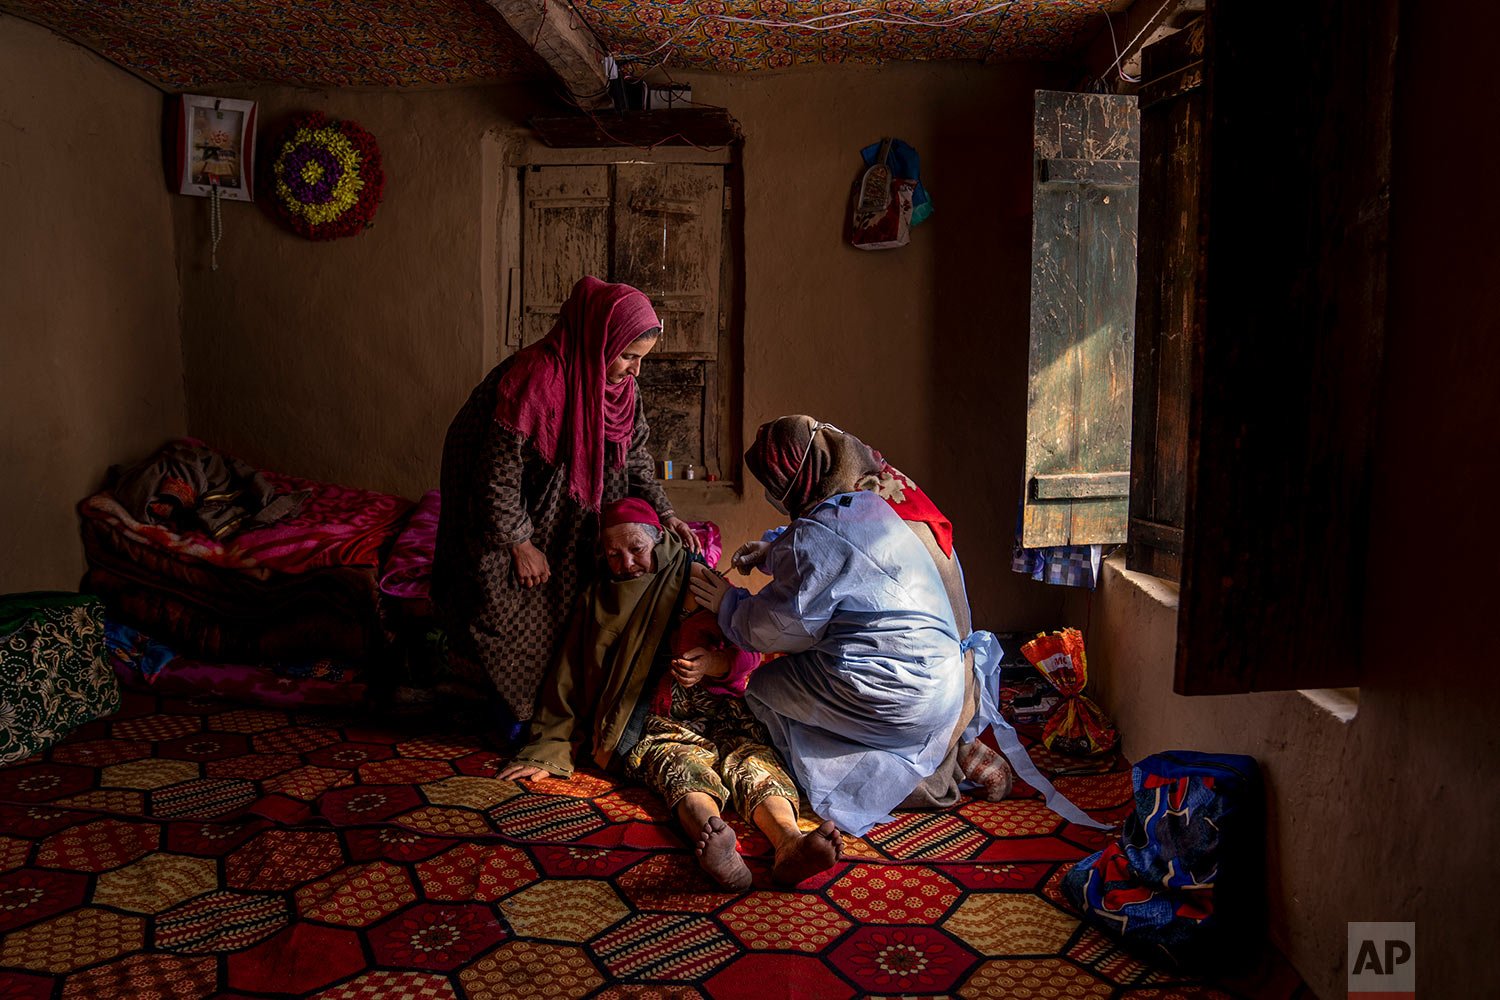  Arsha Begum, An elderly Kashmiri woman, receives the Covishield COVID-19 vaccine from healthcare worker Fozia during a COVID-19 vaccination drive in Budgam, southwest of Srinagar, Indian controlled Kashmir, Jan. 11, 2022. (AP Photo/Dar Yasin) 